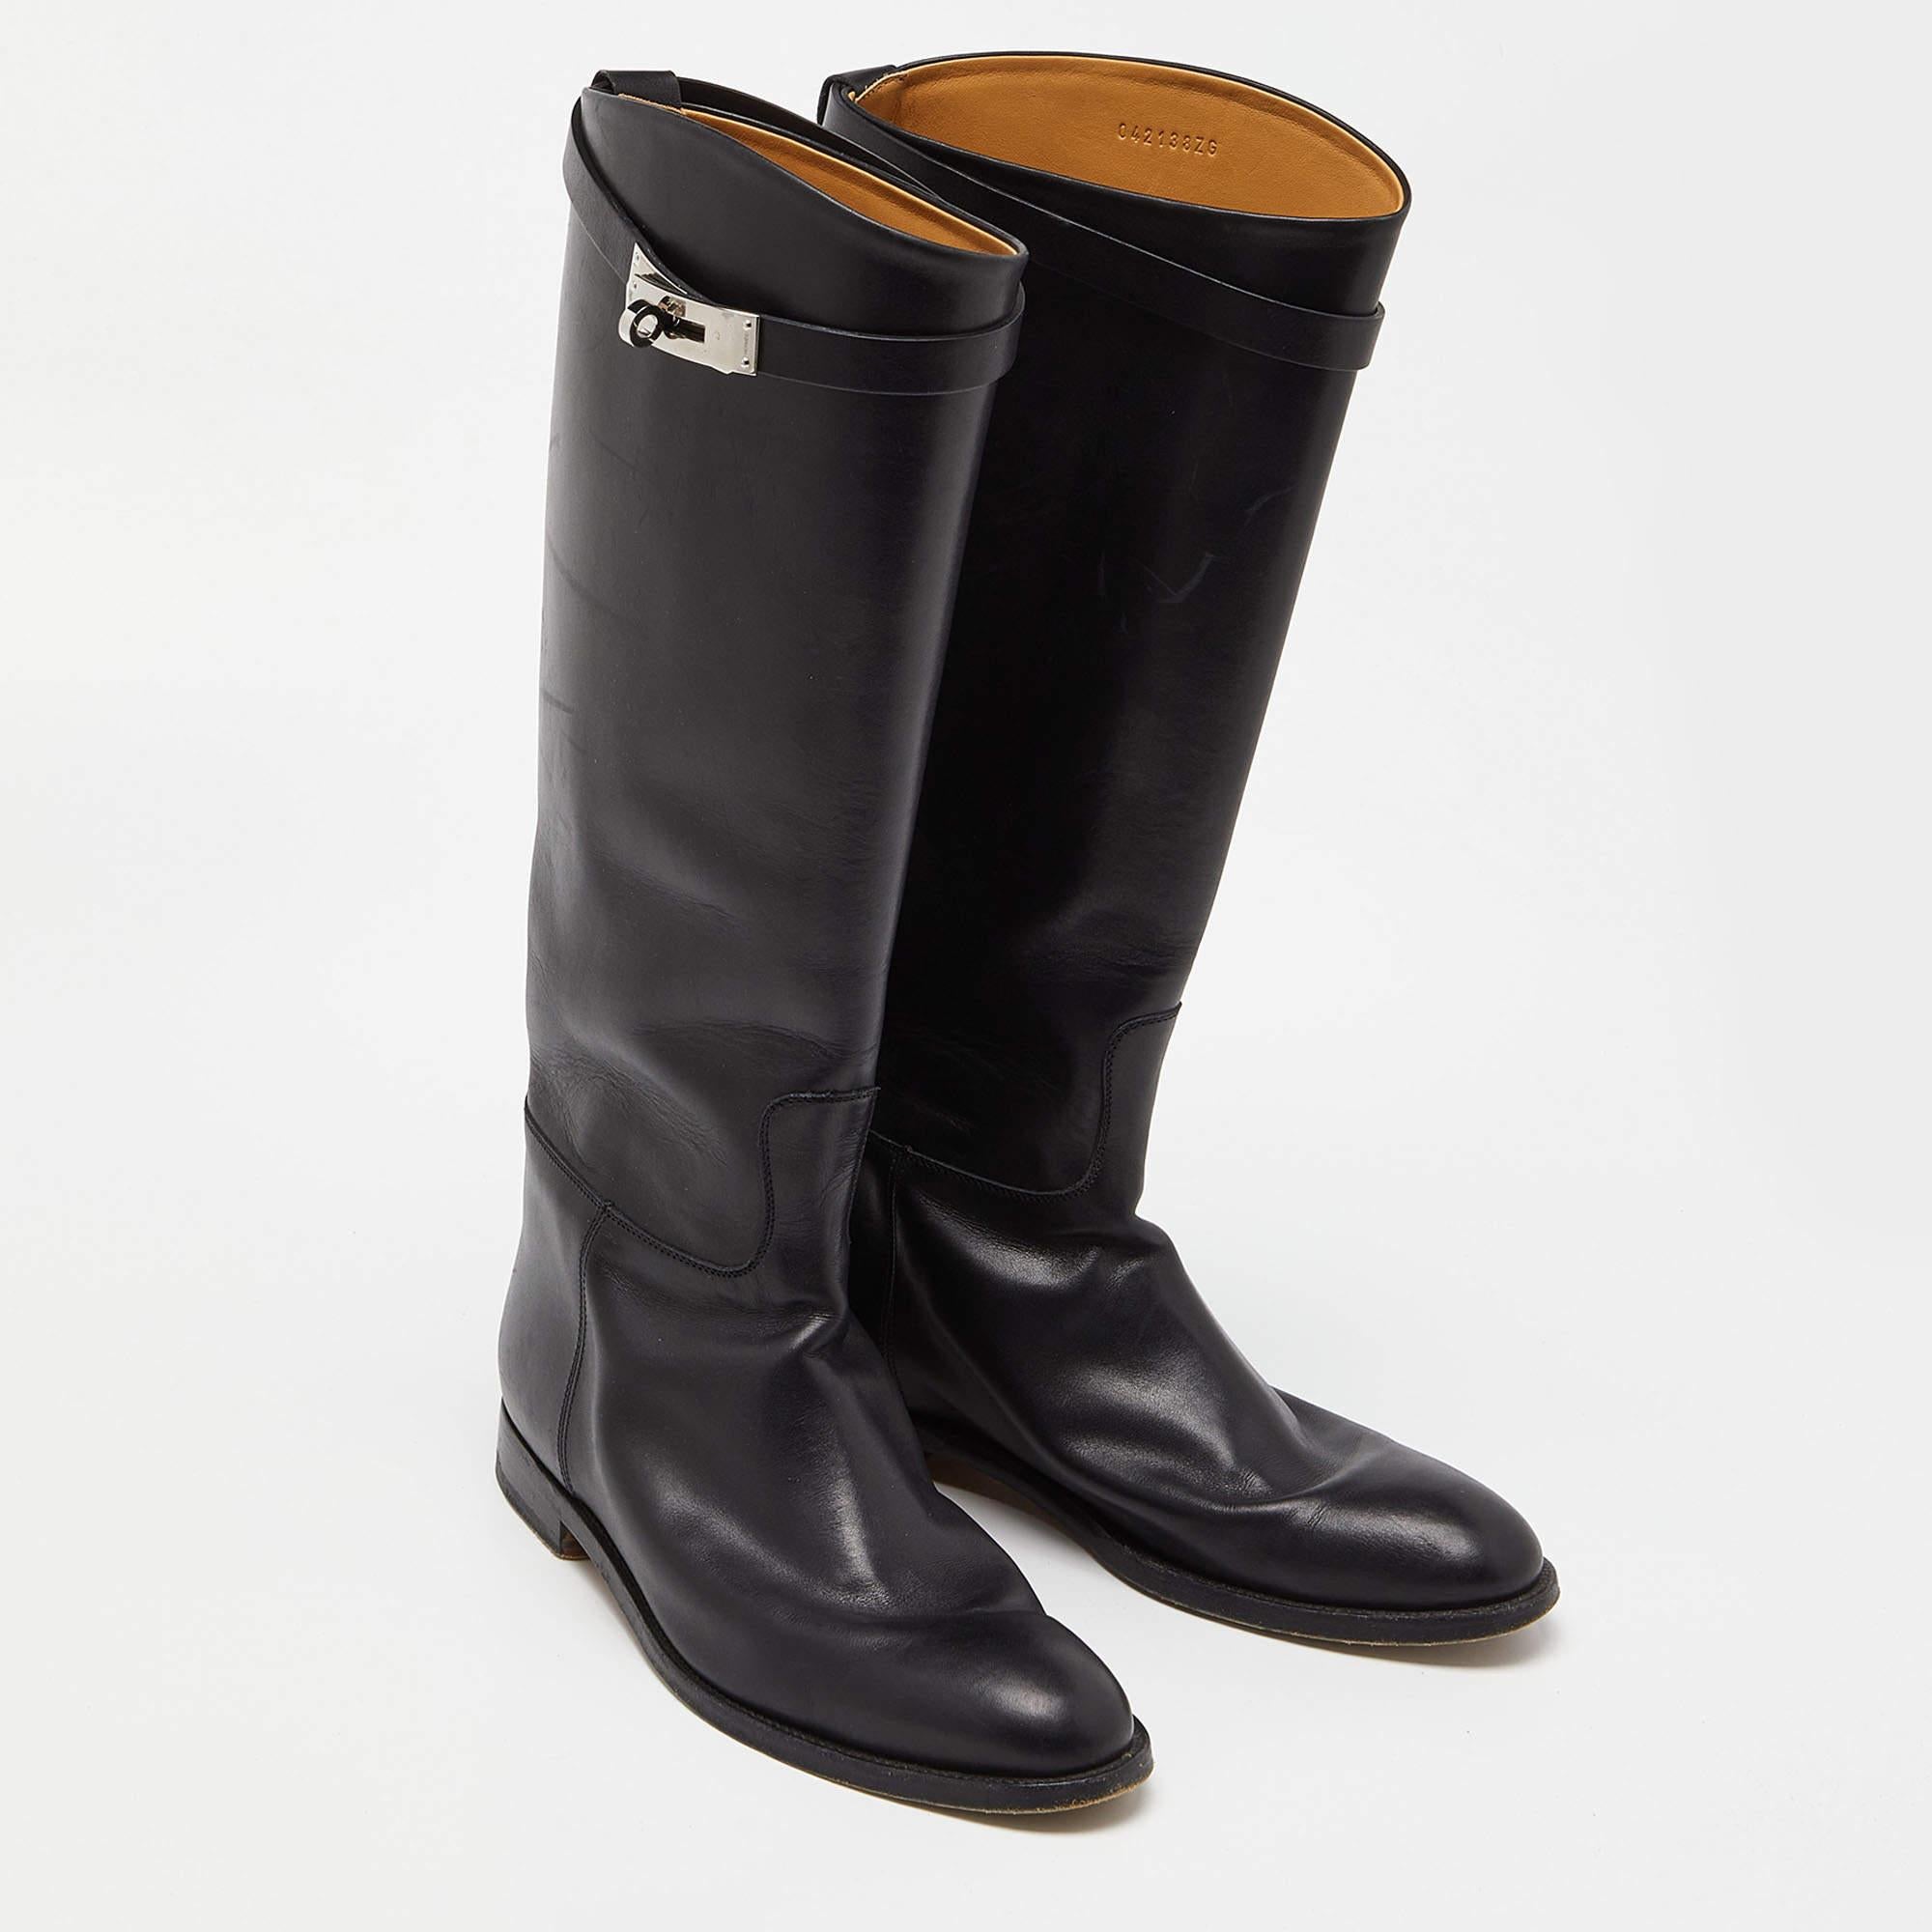 Hermes Black Leather Jumping Boots Size 40 1